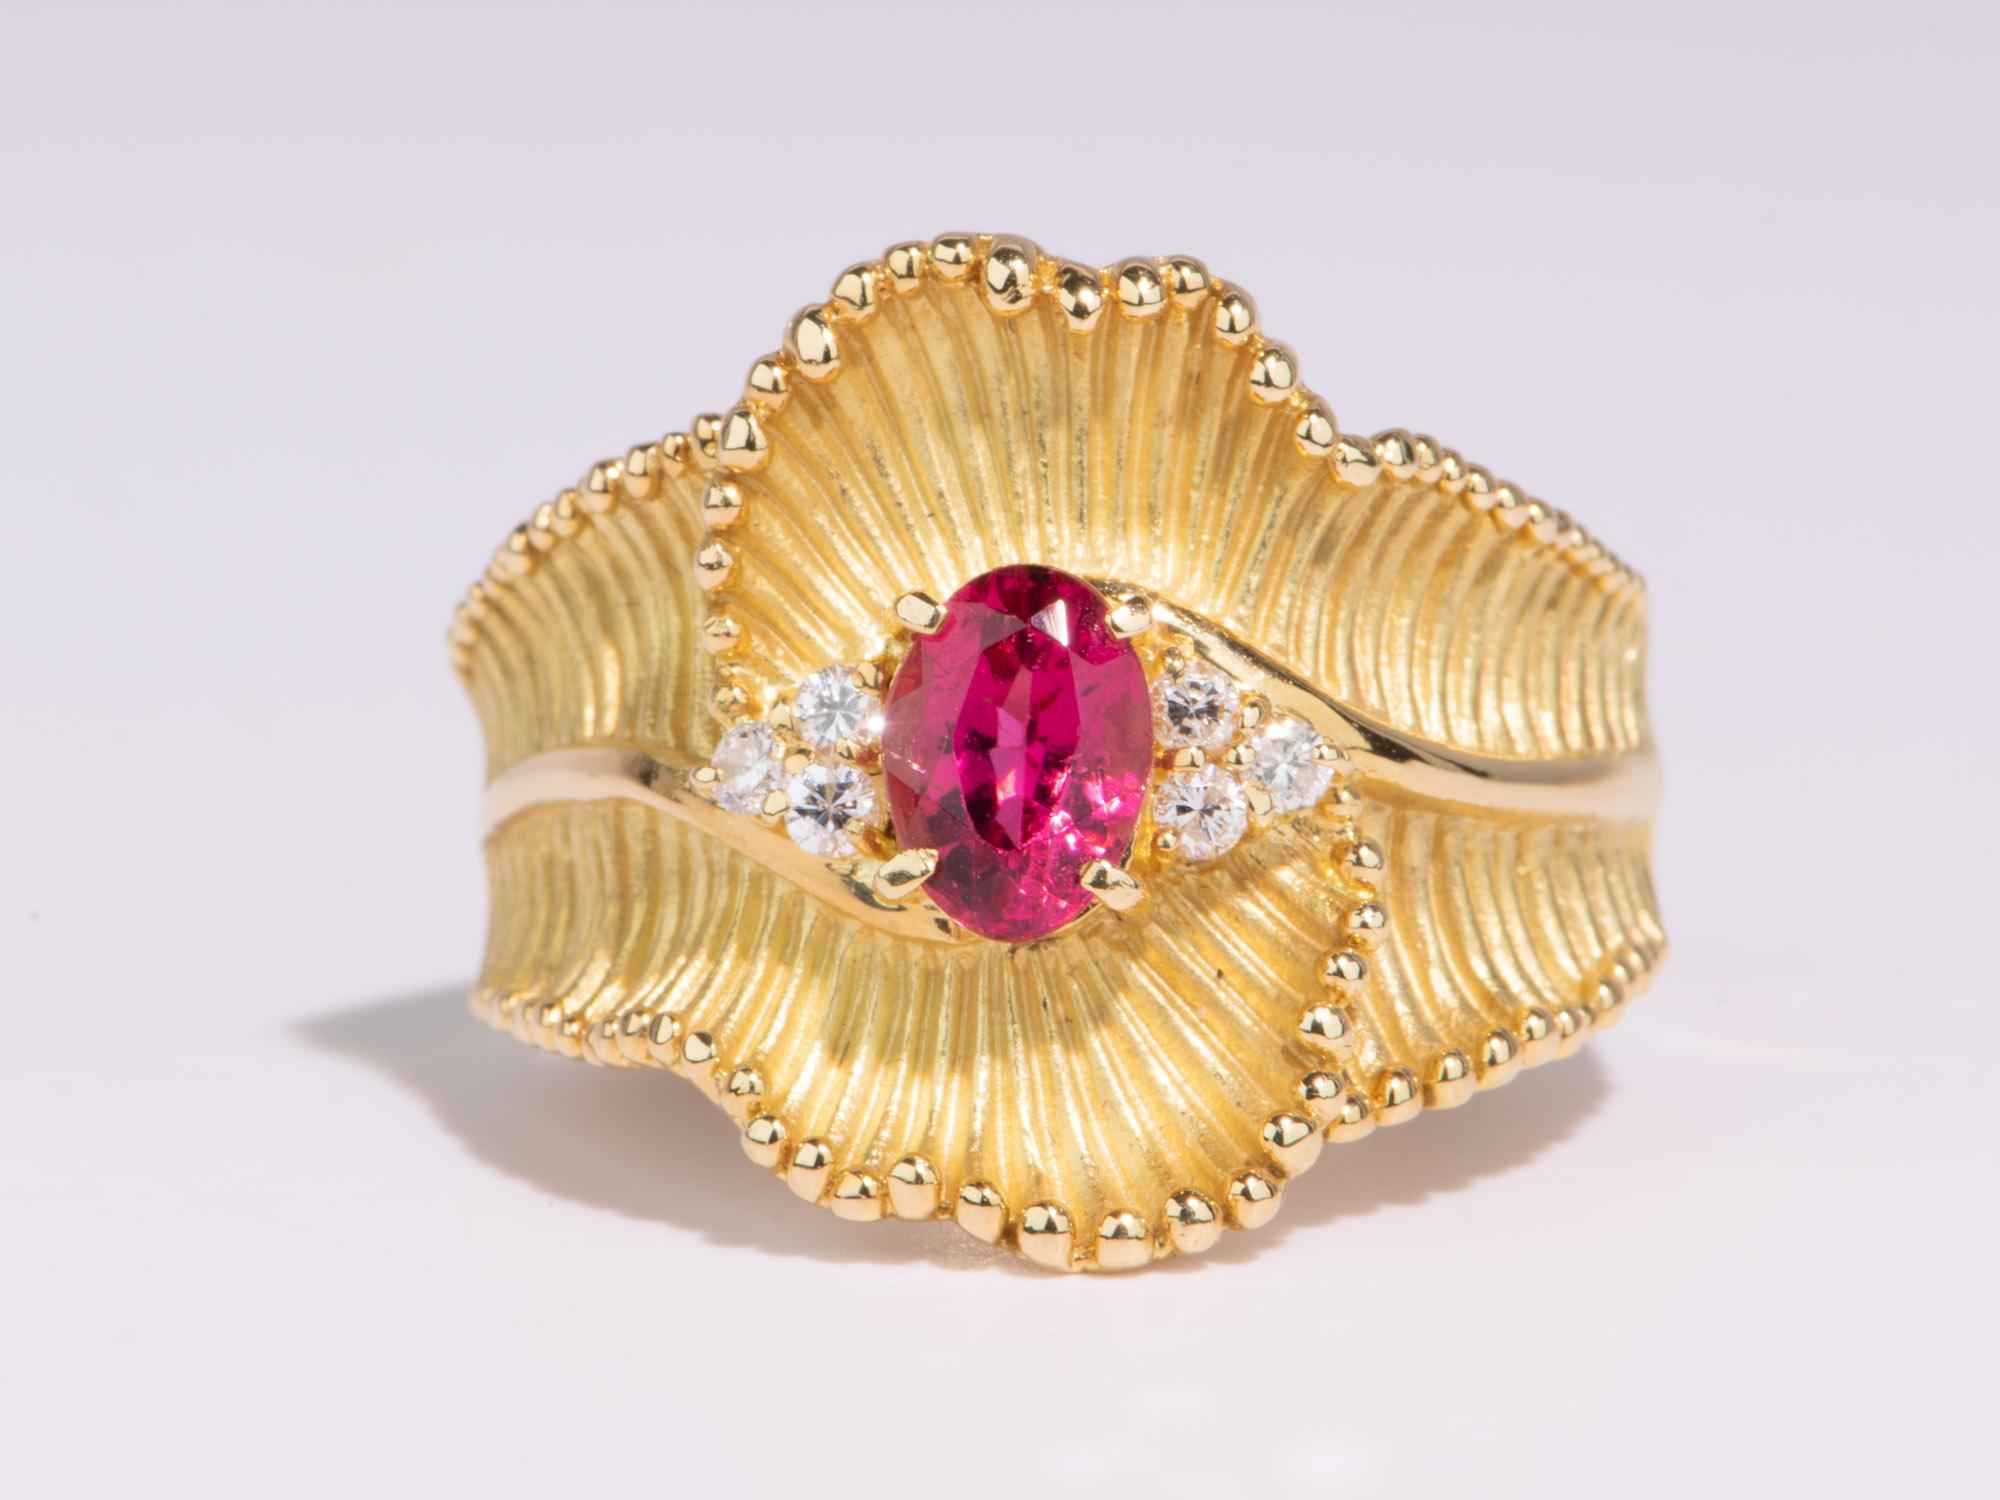 Fall in love with this bold 18K Gold ring featuring a bright pink tourmaline rubellite gemstone in the center, caressed by a bold curved ribbon design. Made from a hand-carved wax design, this eye-catching ring is the perfect statement piece to wow